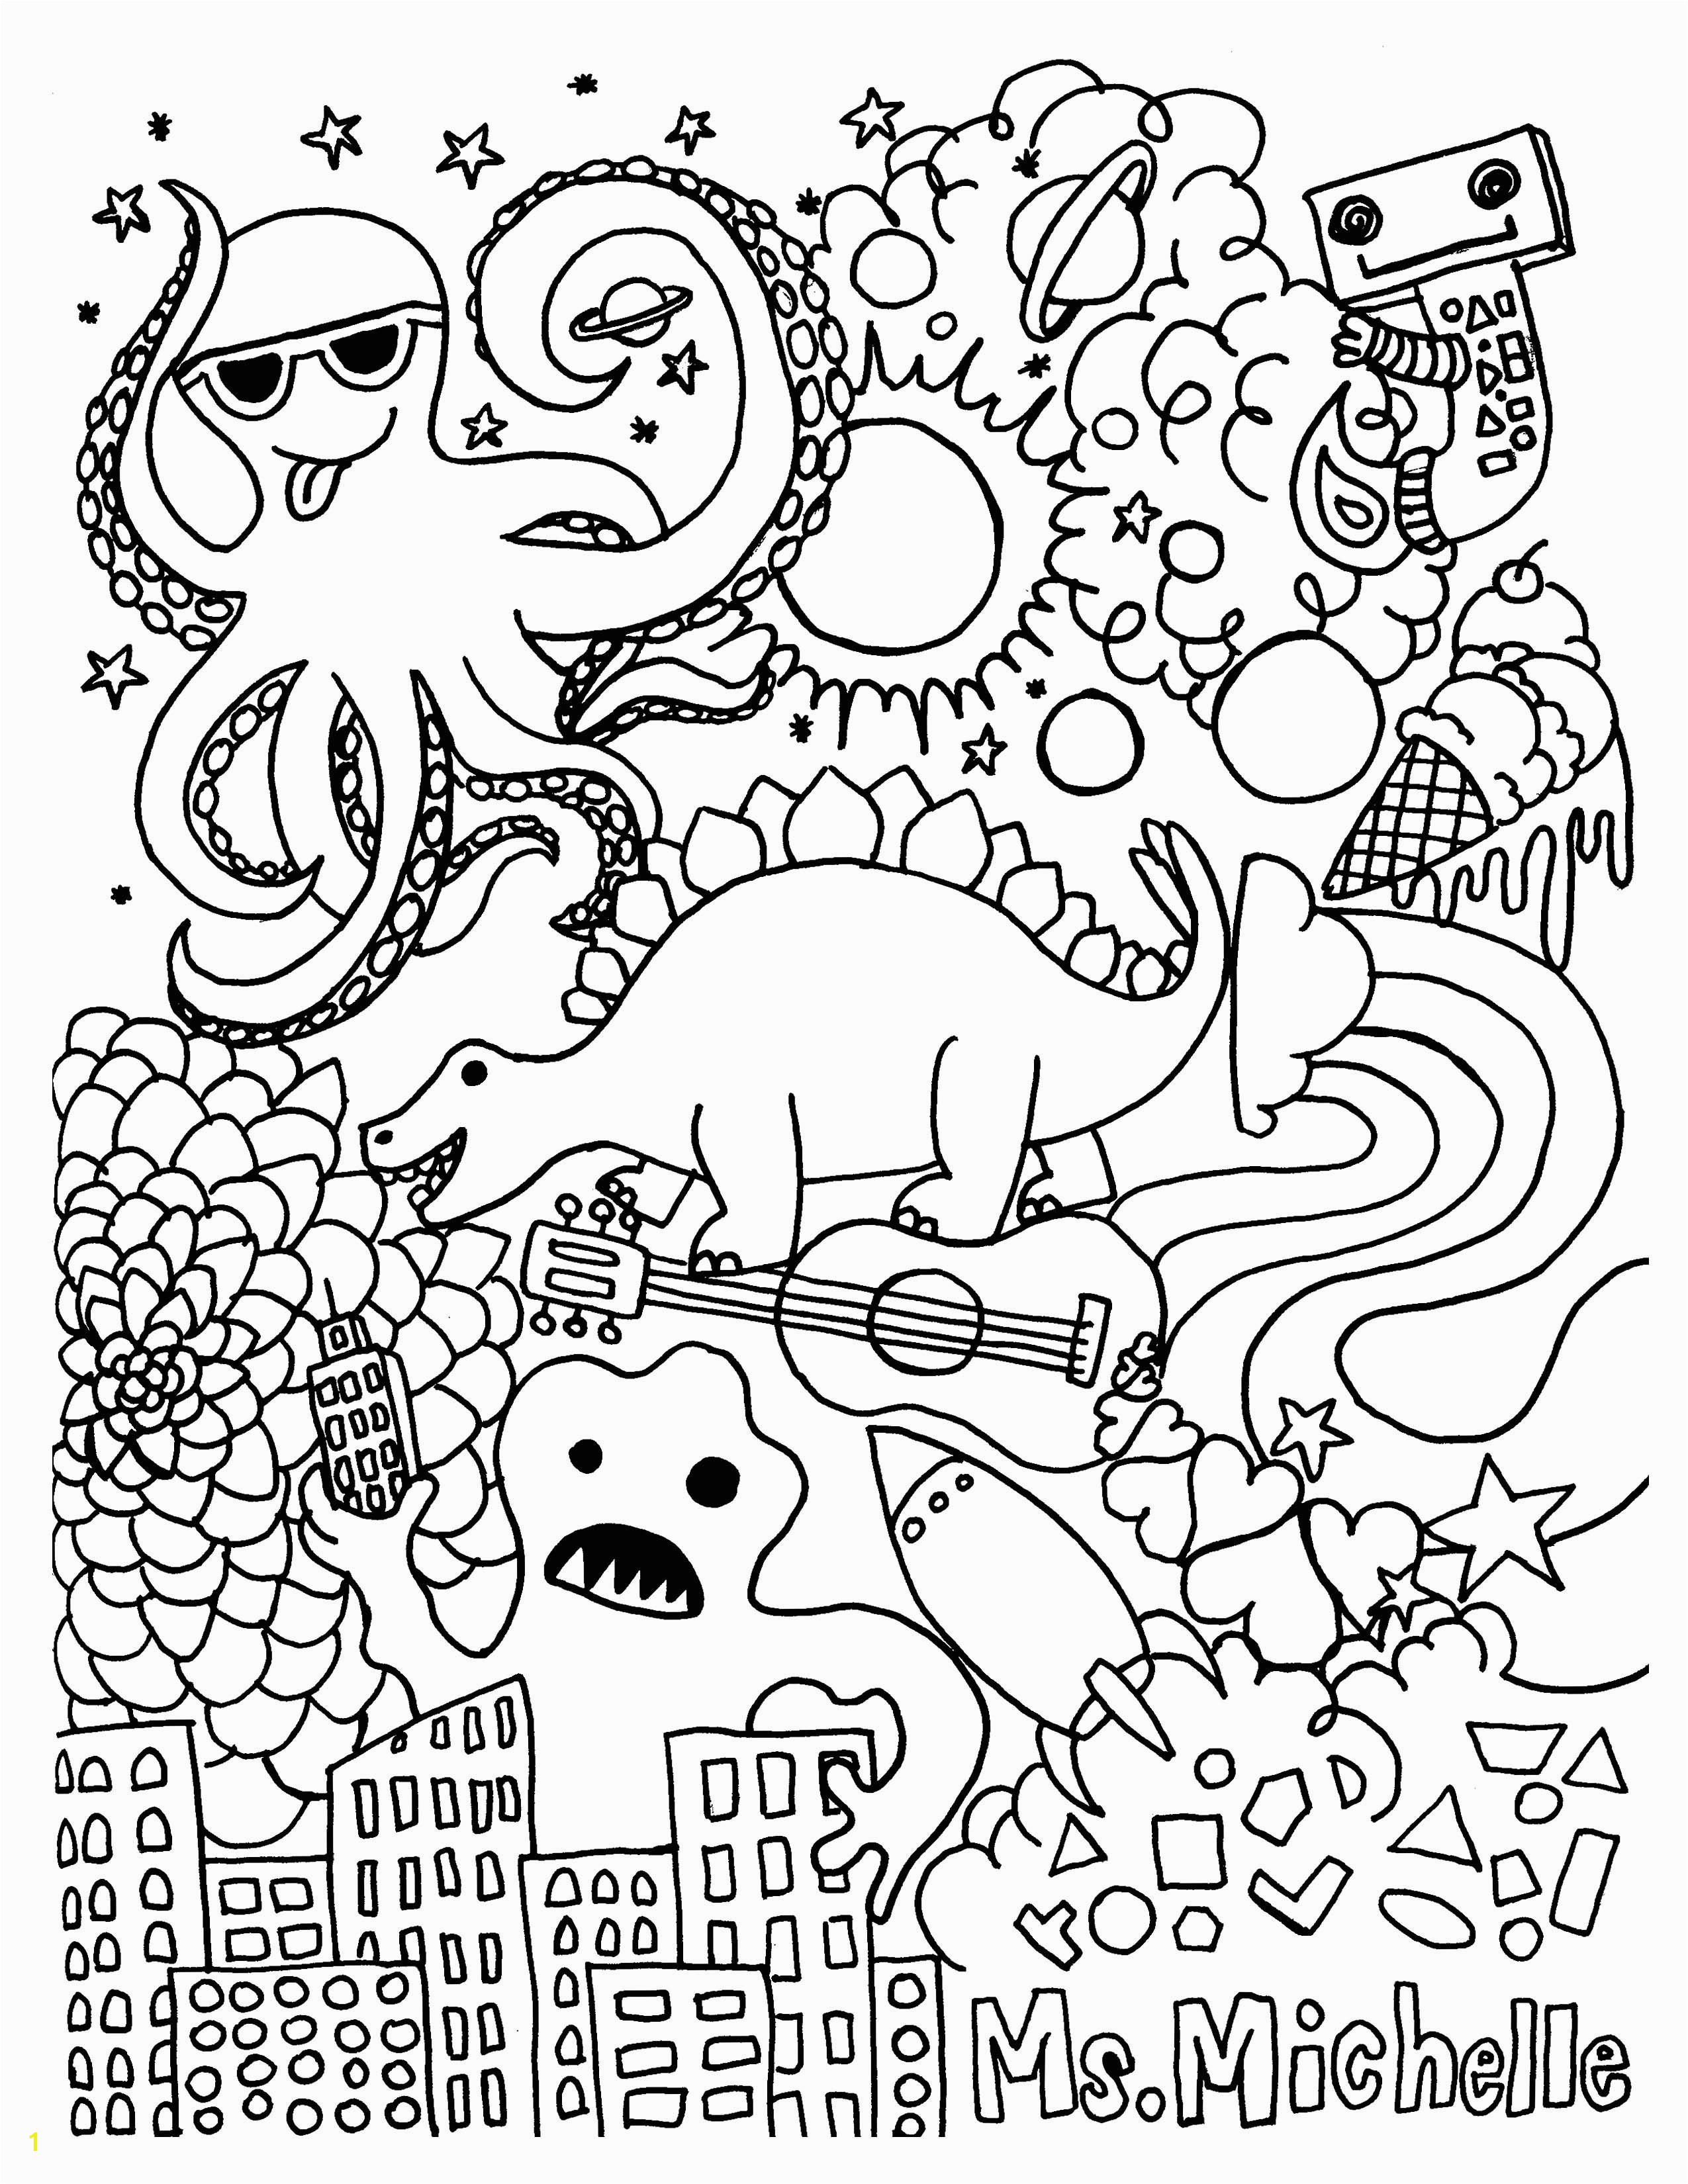 Printing Coloring Pages Lovely Cool Coloring Page Unique Witch